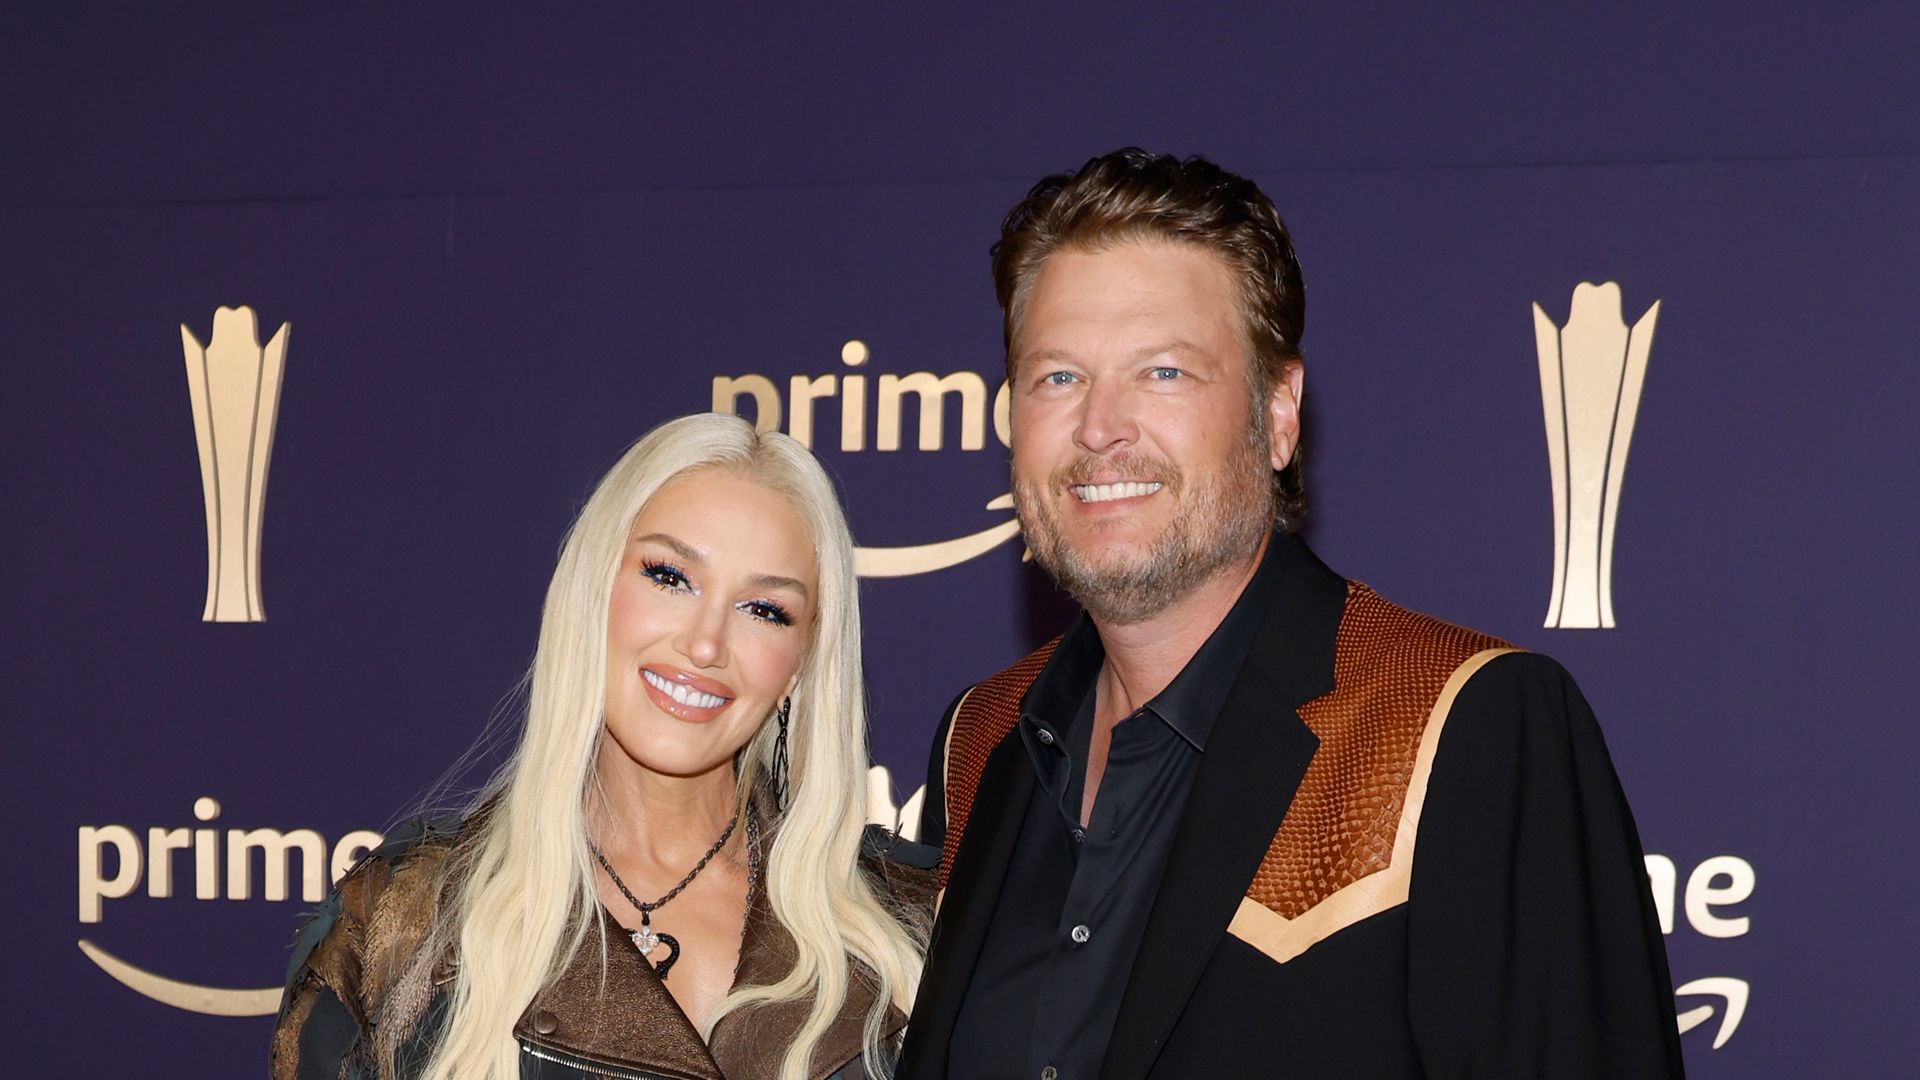 FRISCO, TEXAS - MAY 16: EDITORIAL USE ONLY. (L-R) Gwen Stefani and Blake Shelton attend the 59th Academy of Country Music Awards at Omni Frisco Hotel at The Star on May 16, 2024 in Frisco, Texas. (Photo by Jason Kempin/Getty Images)